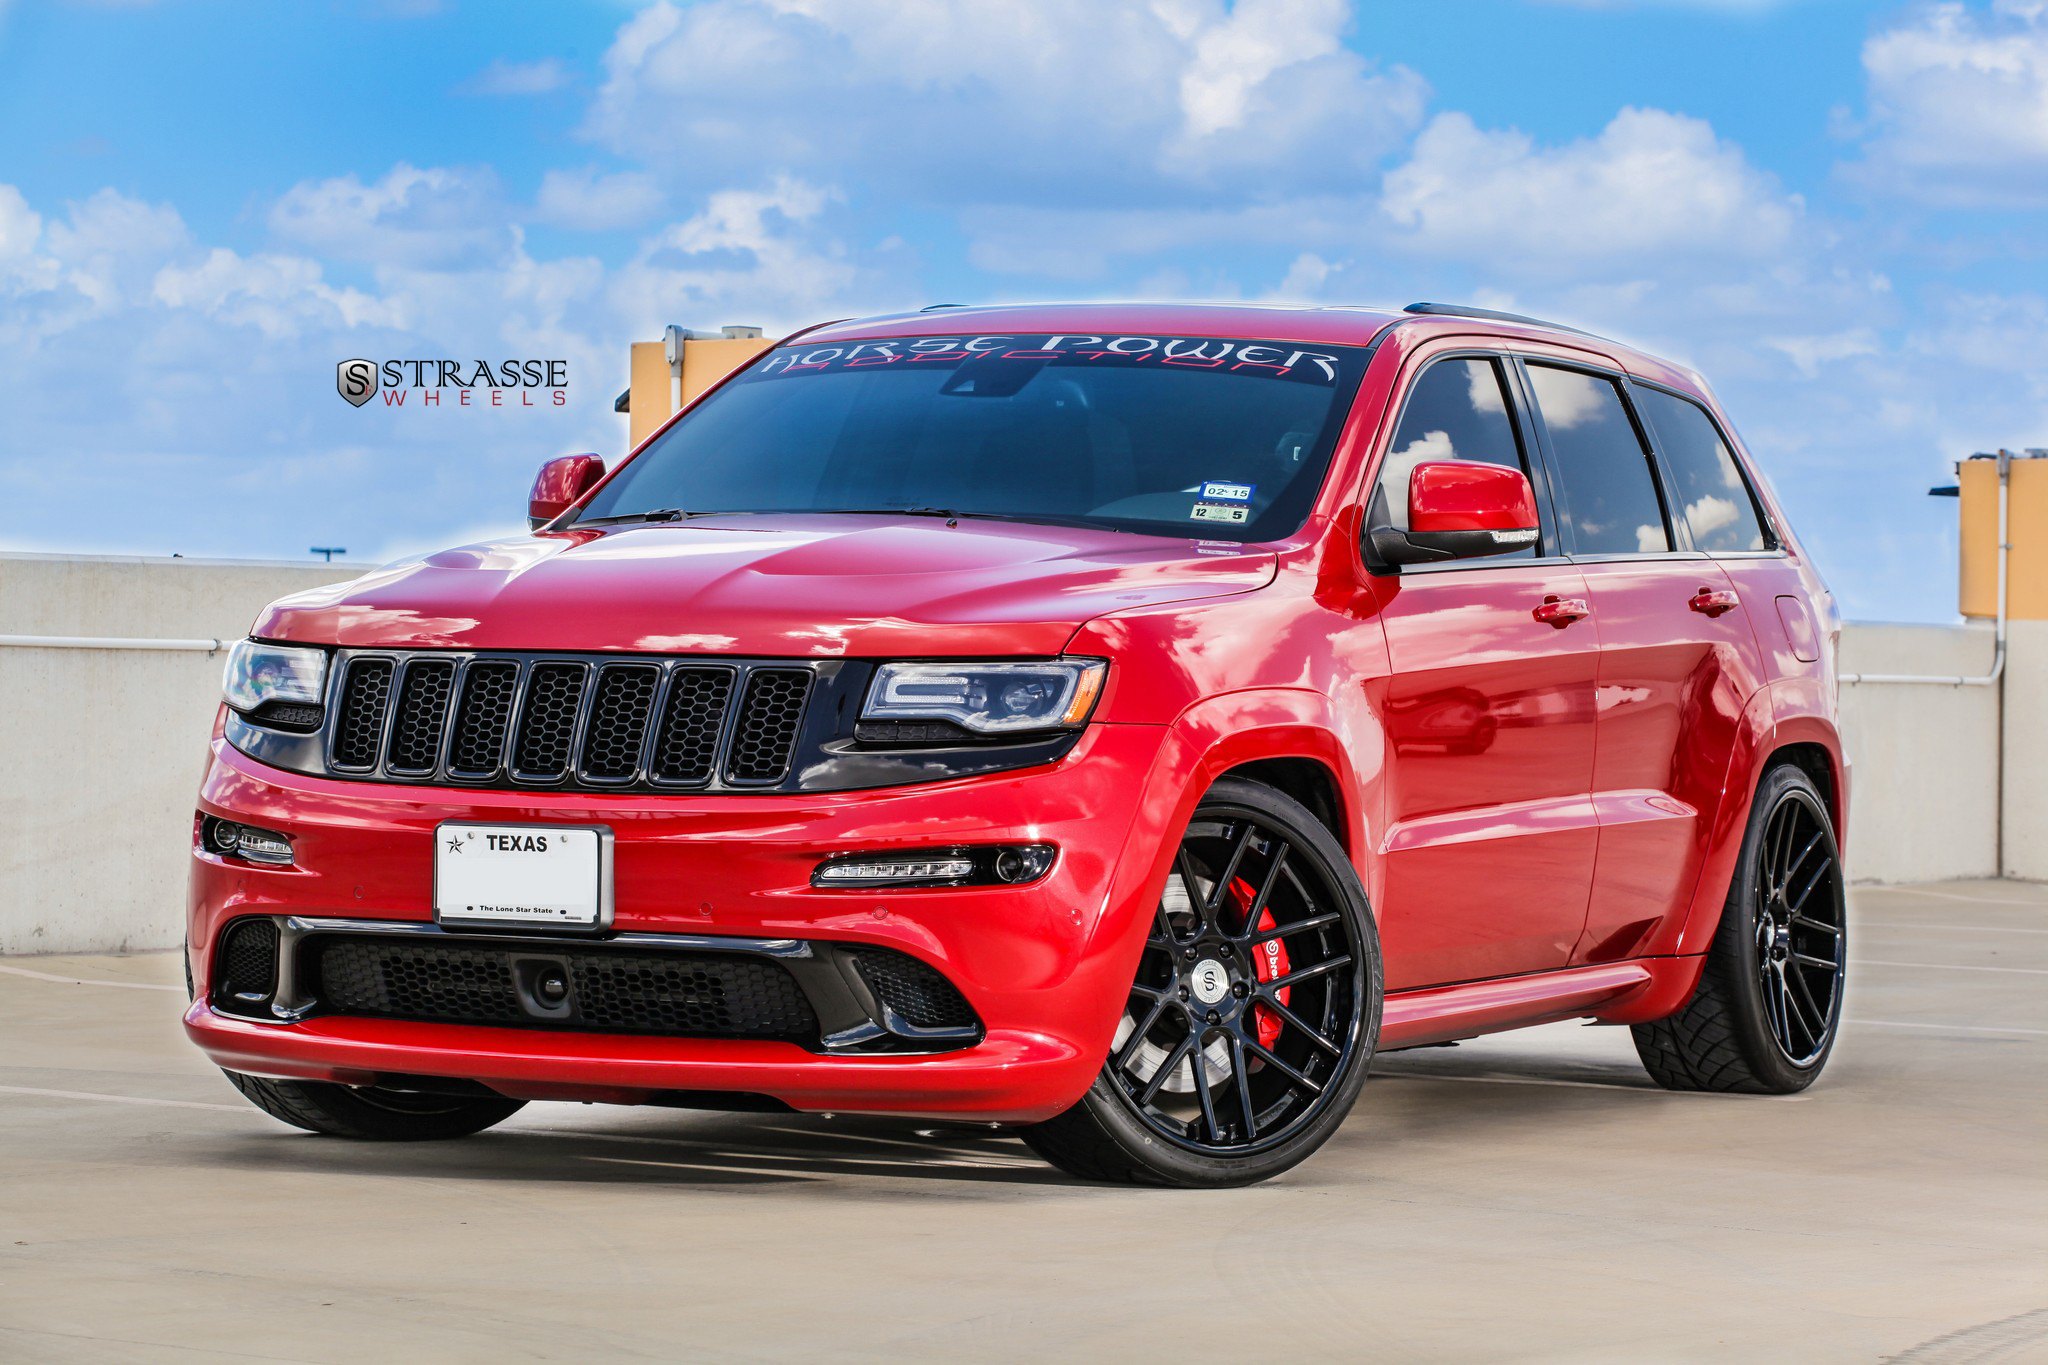 Red Jeep Grand Cherokee with Blacked Out Grille - Photo by Strasse Forged